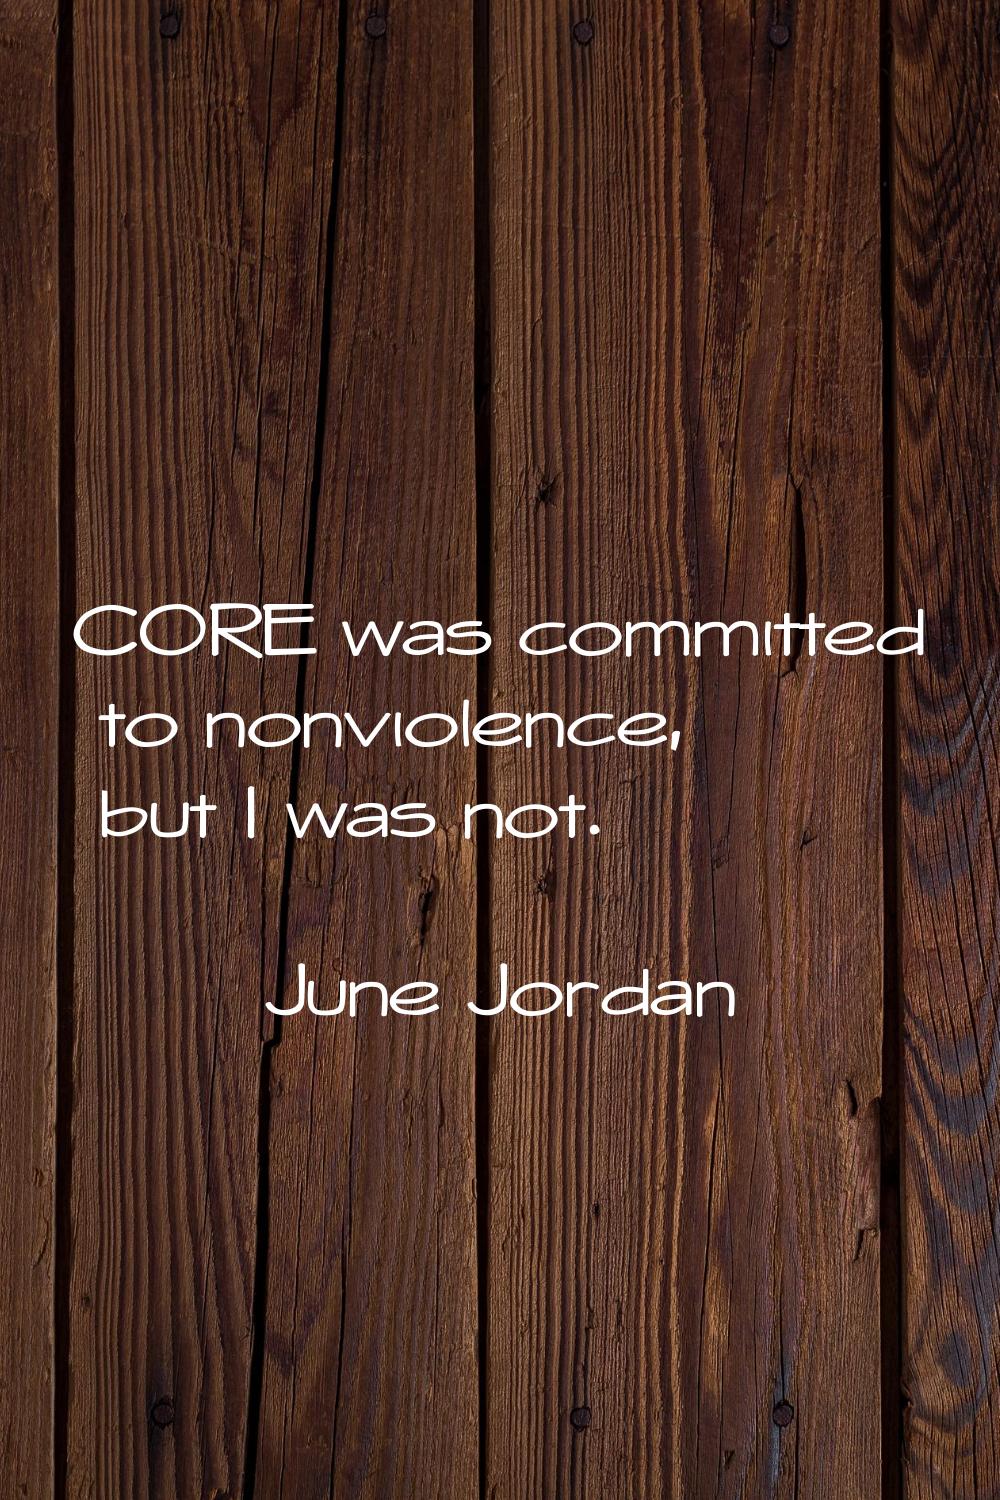 CORE was committed to nonviolence, but I was not.